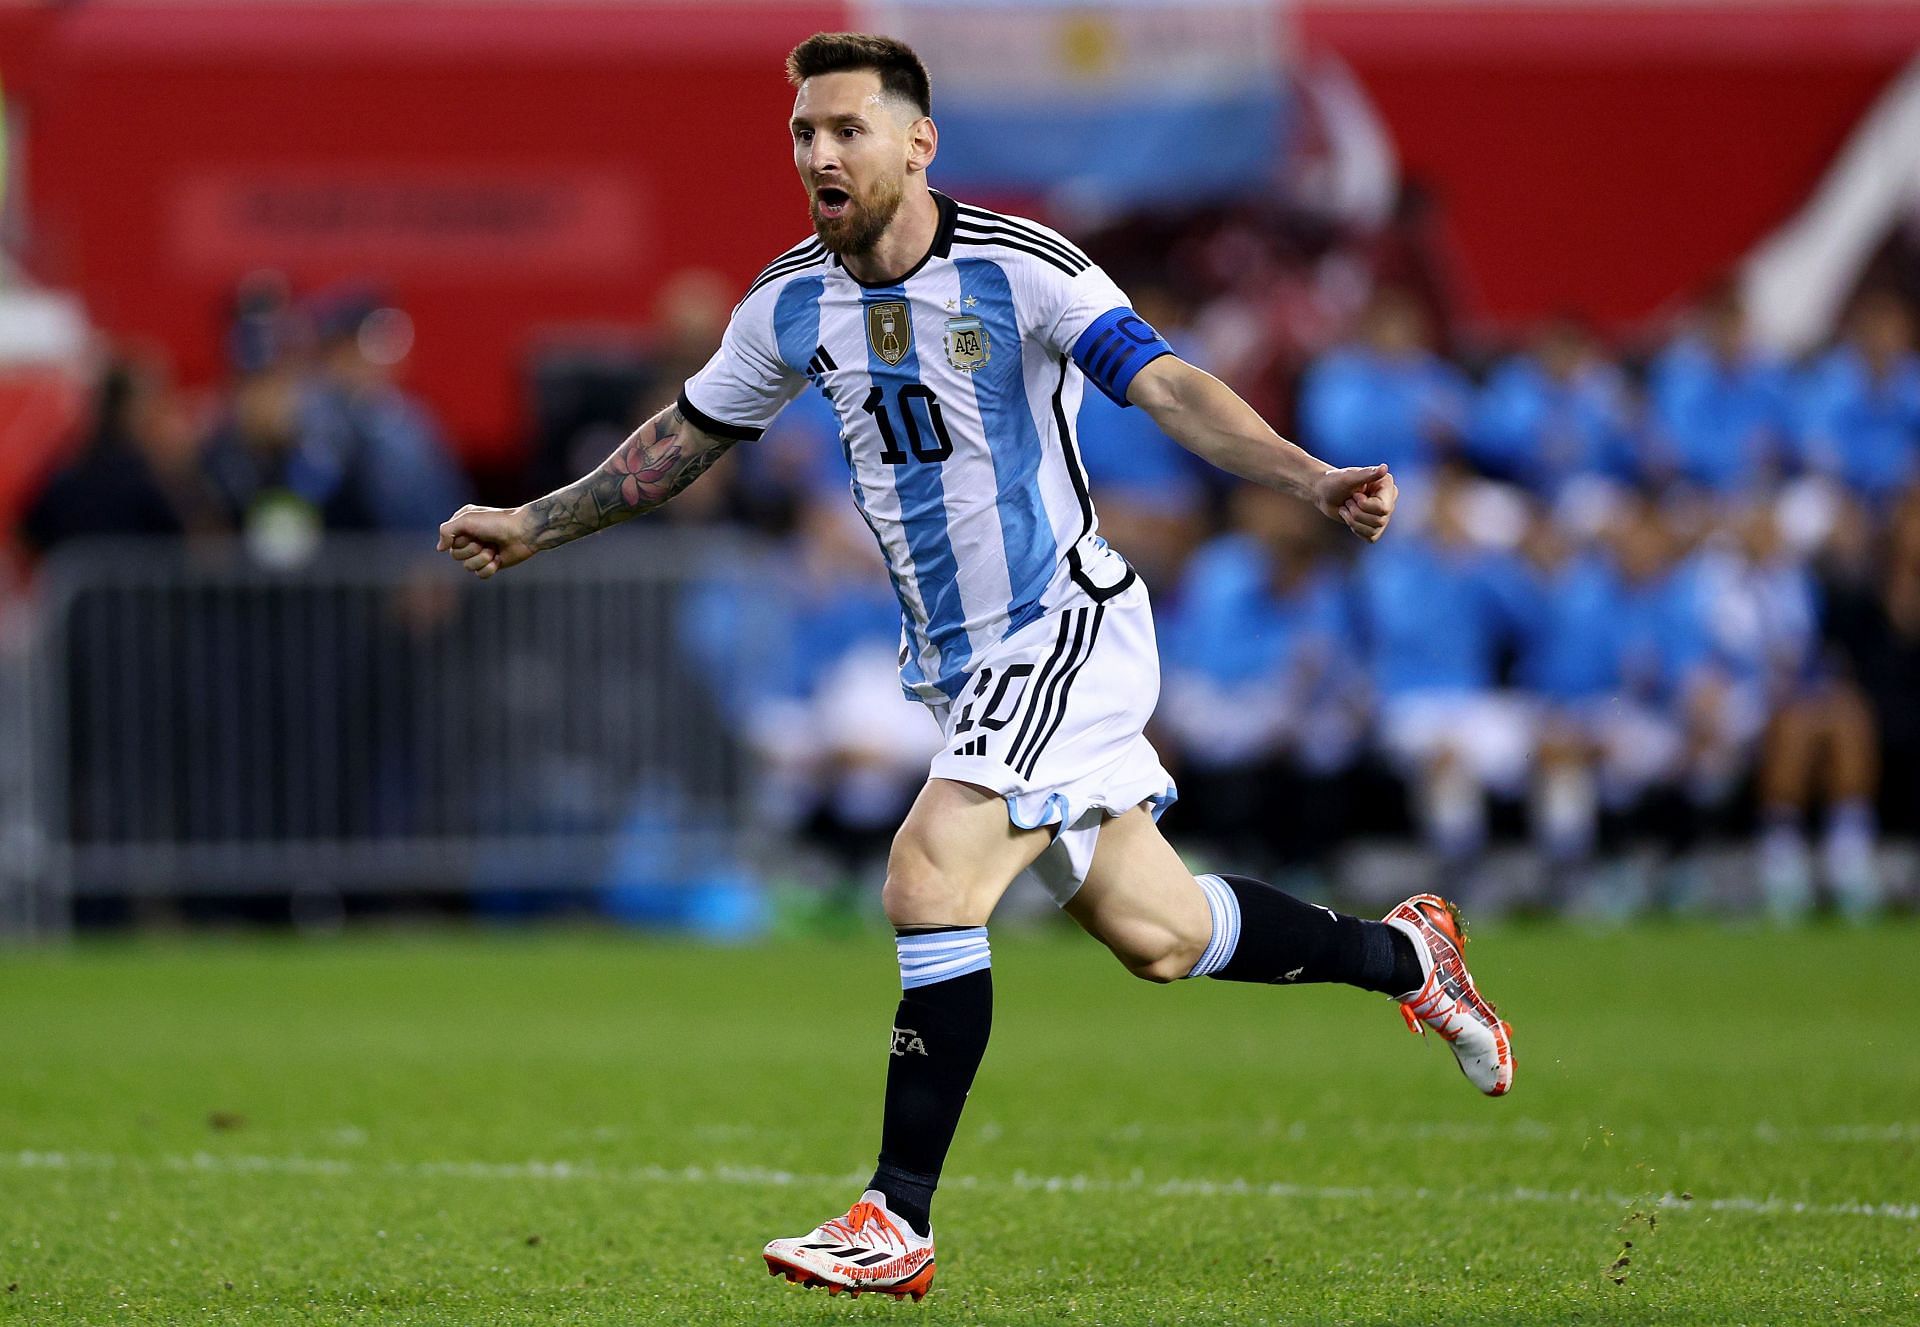 The Argentina captain has confirmed that this will be his last World Cup appearance.